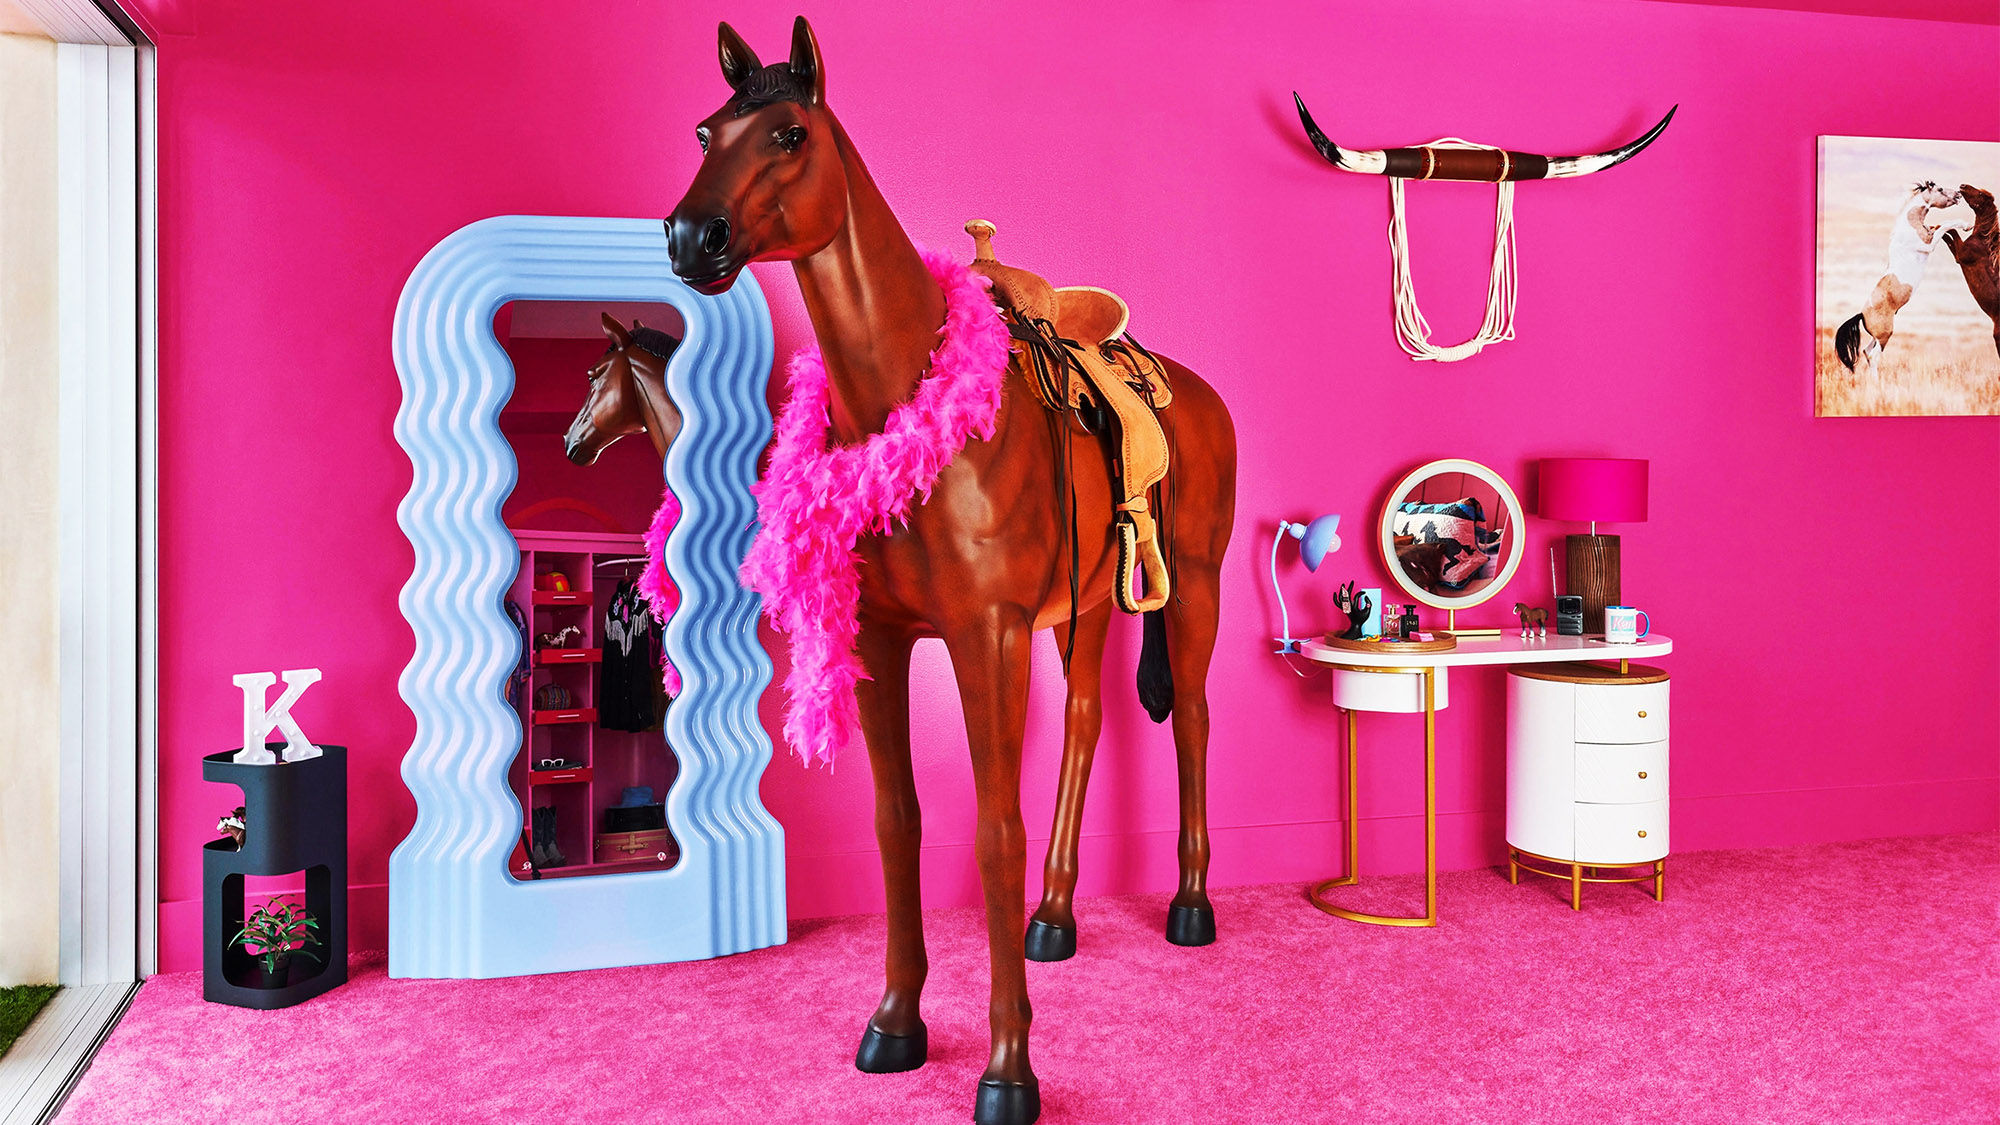 Ken's bedroom at the Barbie's Malibu DreamHouse is outfitted with unique Barbie-inspired amenities, including a life-size toy horse.